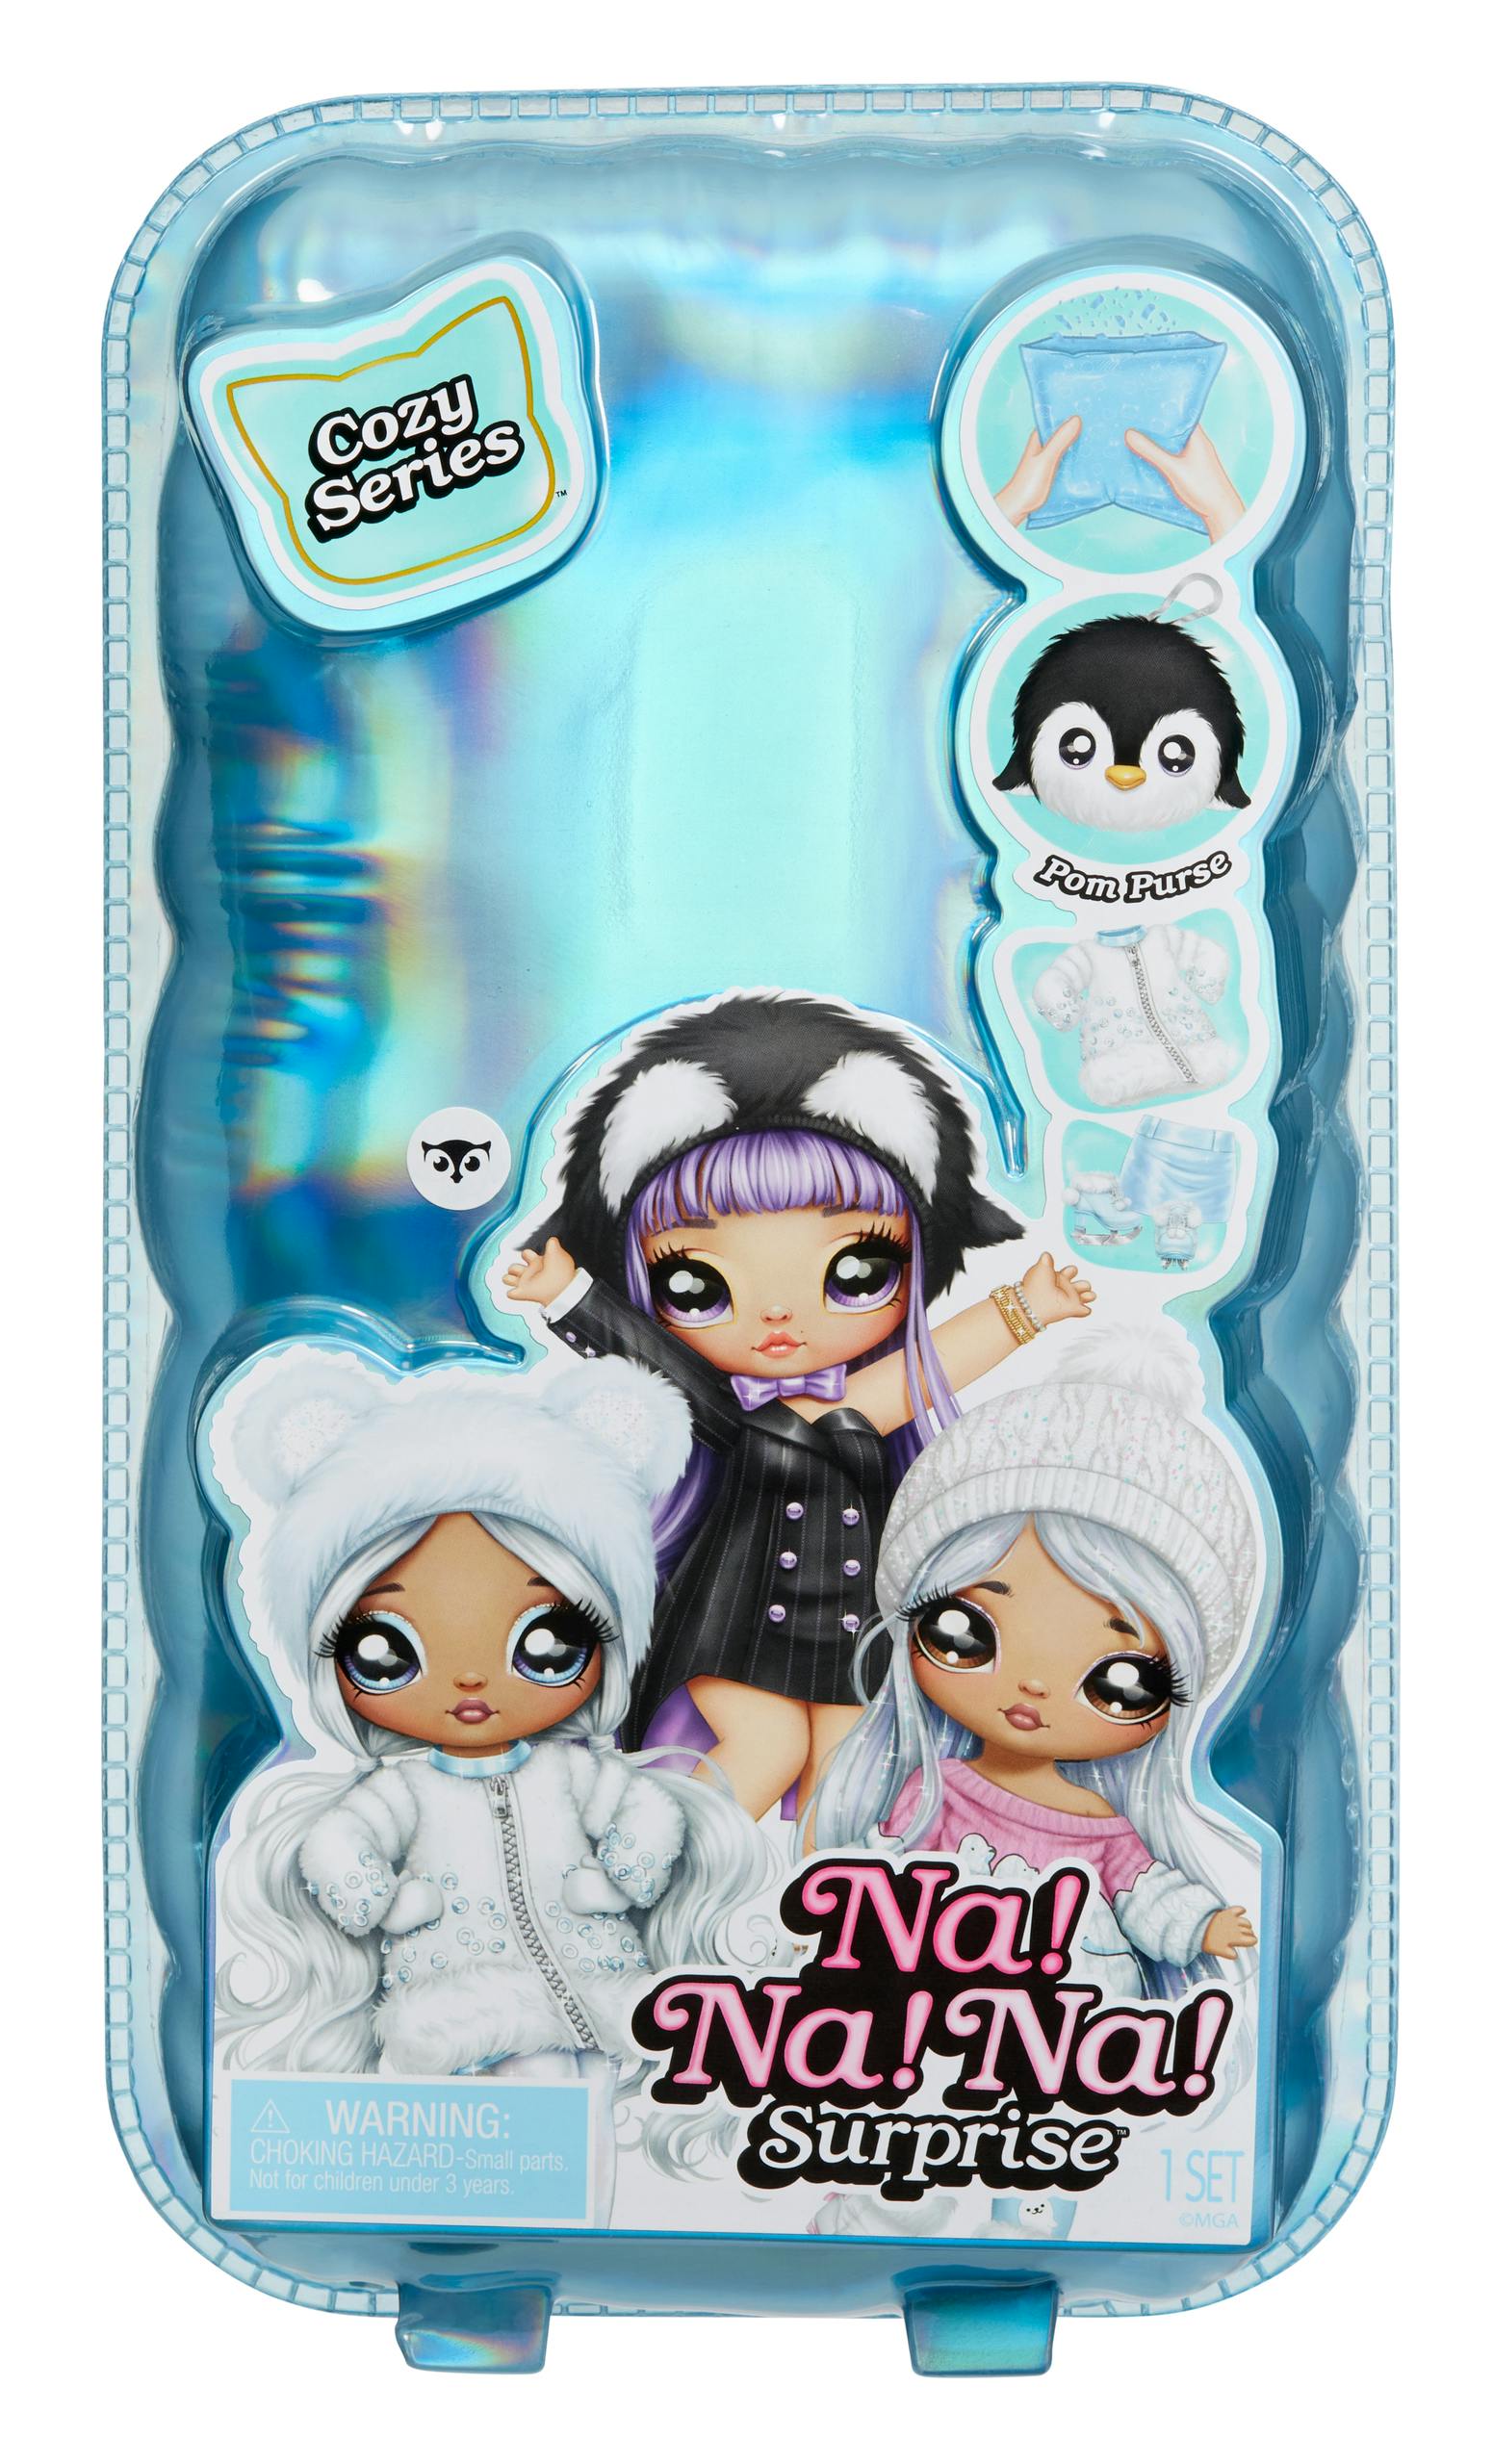 Na! Na! Na! Surprise 2-in-1 Cozy Series Winter Pom Doll (1 van assortiment)